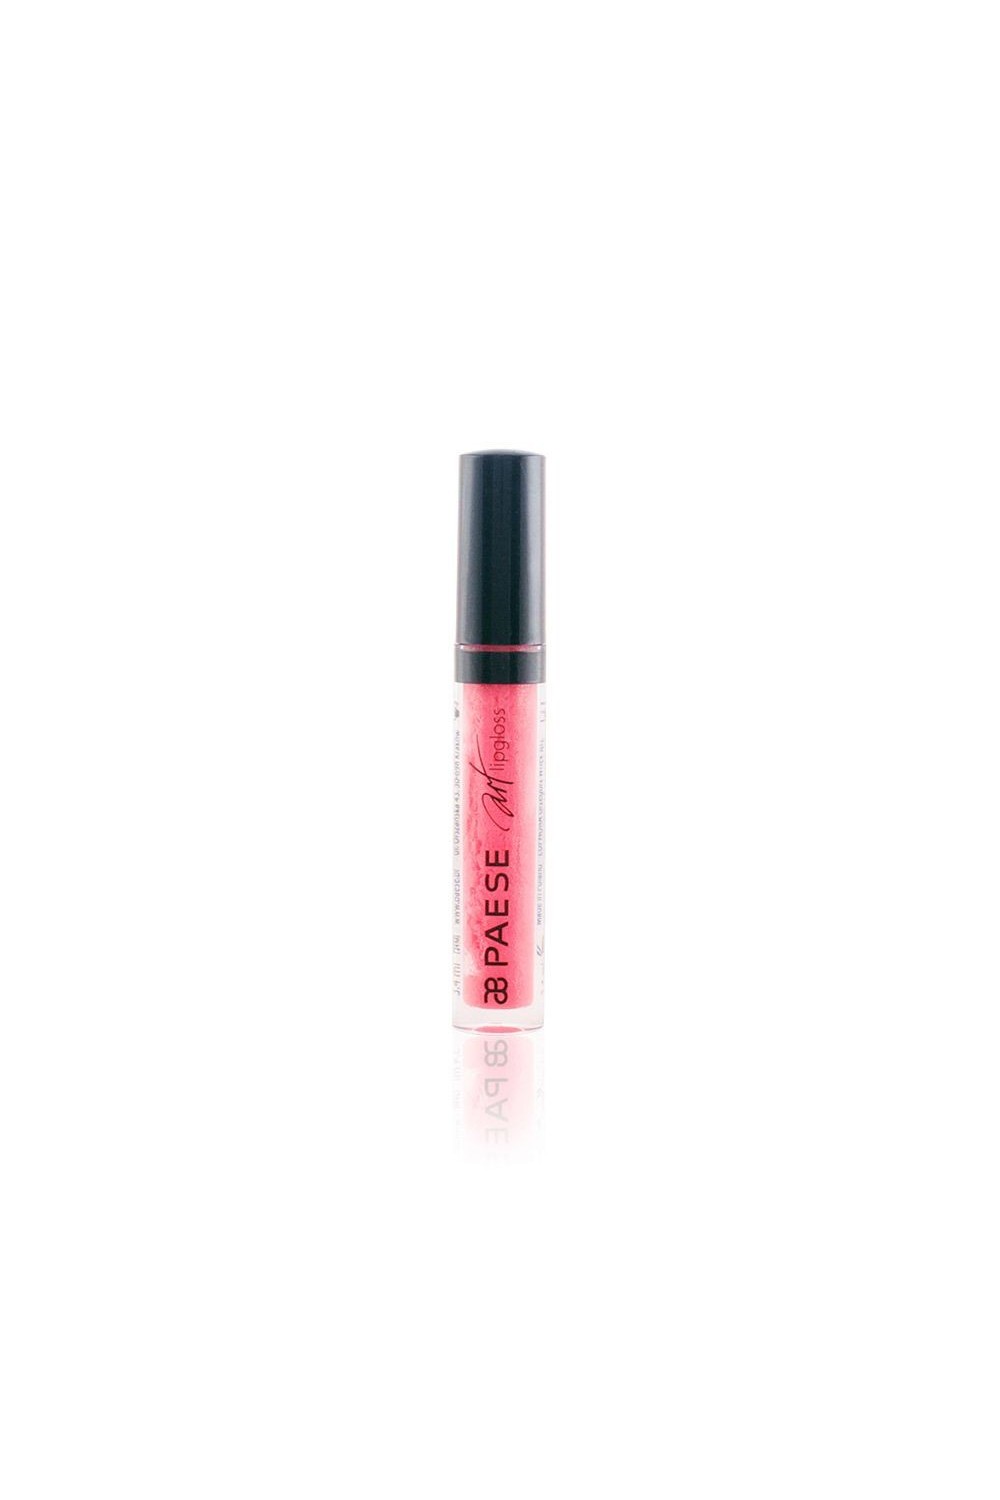 PAESE COSMETICS - Paese Art Shimmering Lipgloss 416